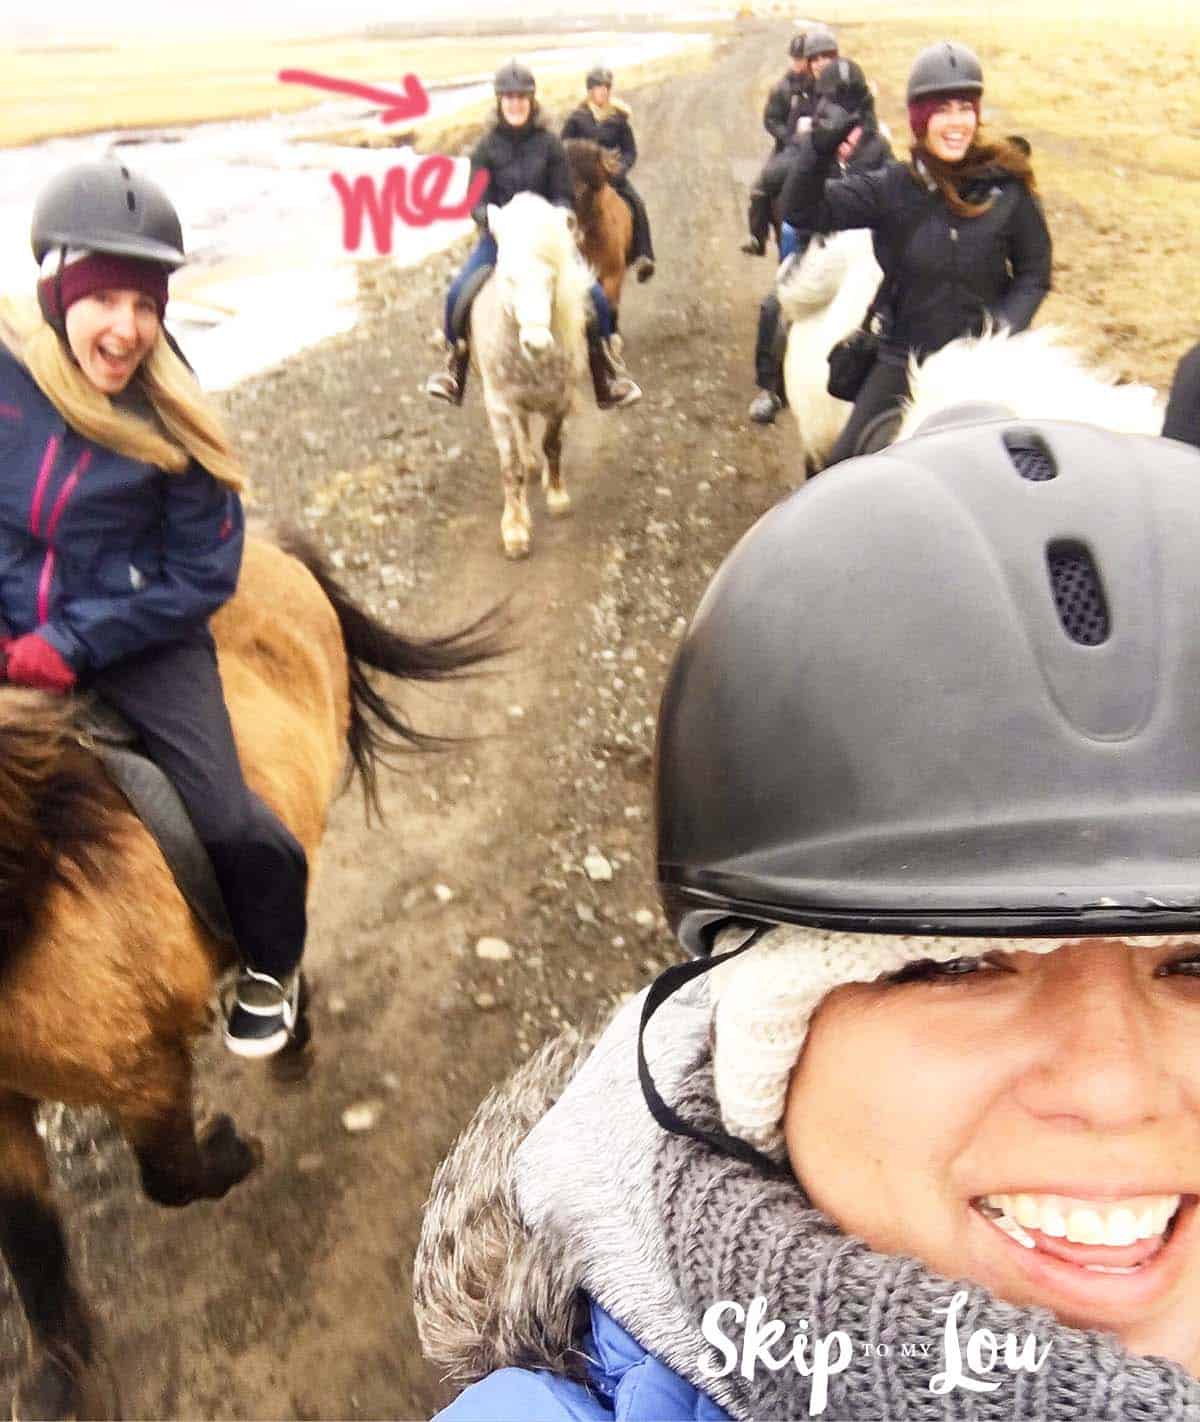 riding icelandic horses on a cold day with awesome people.